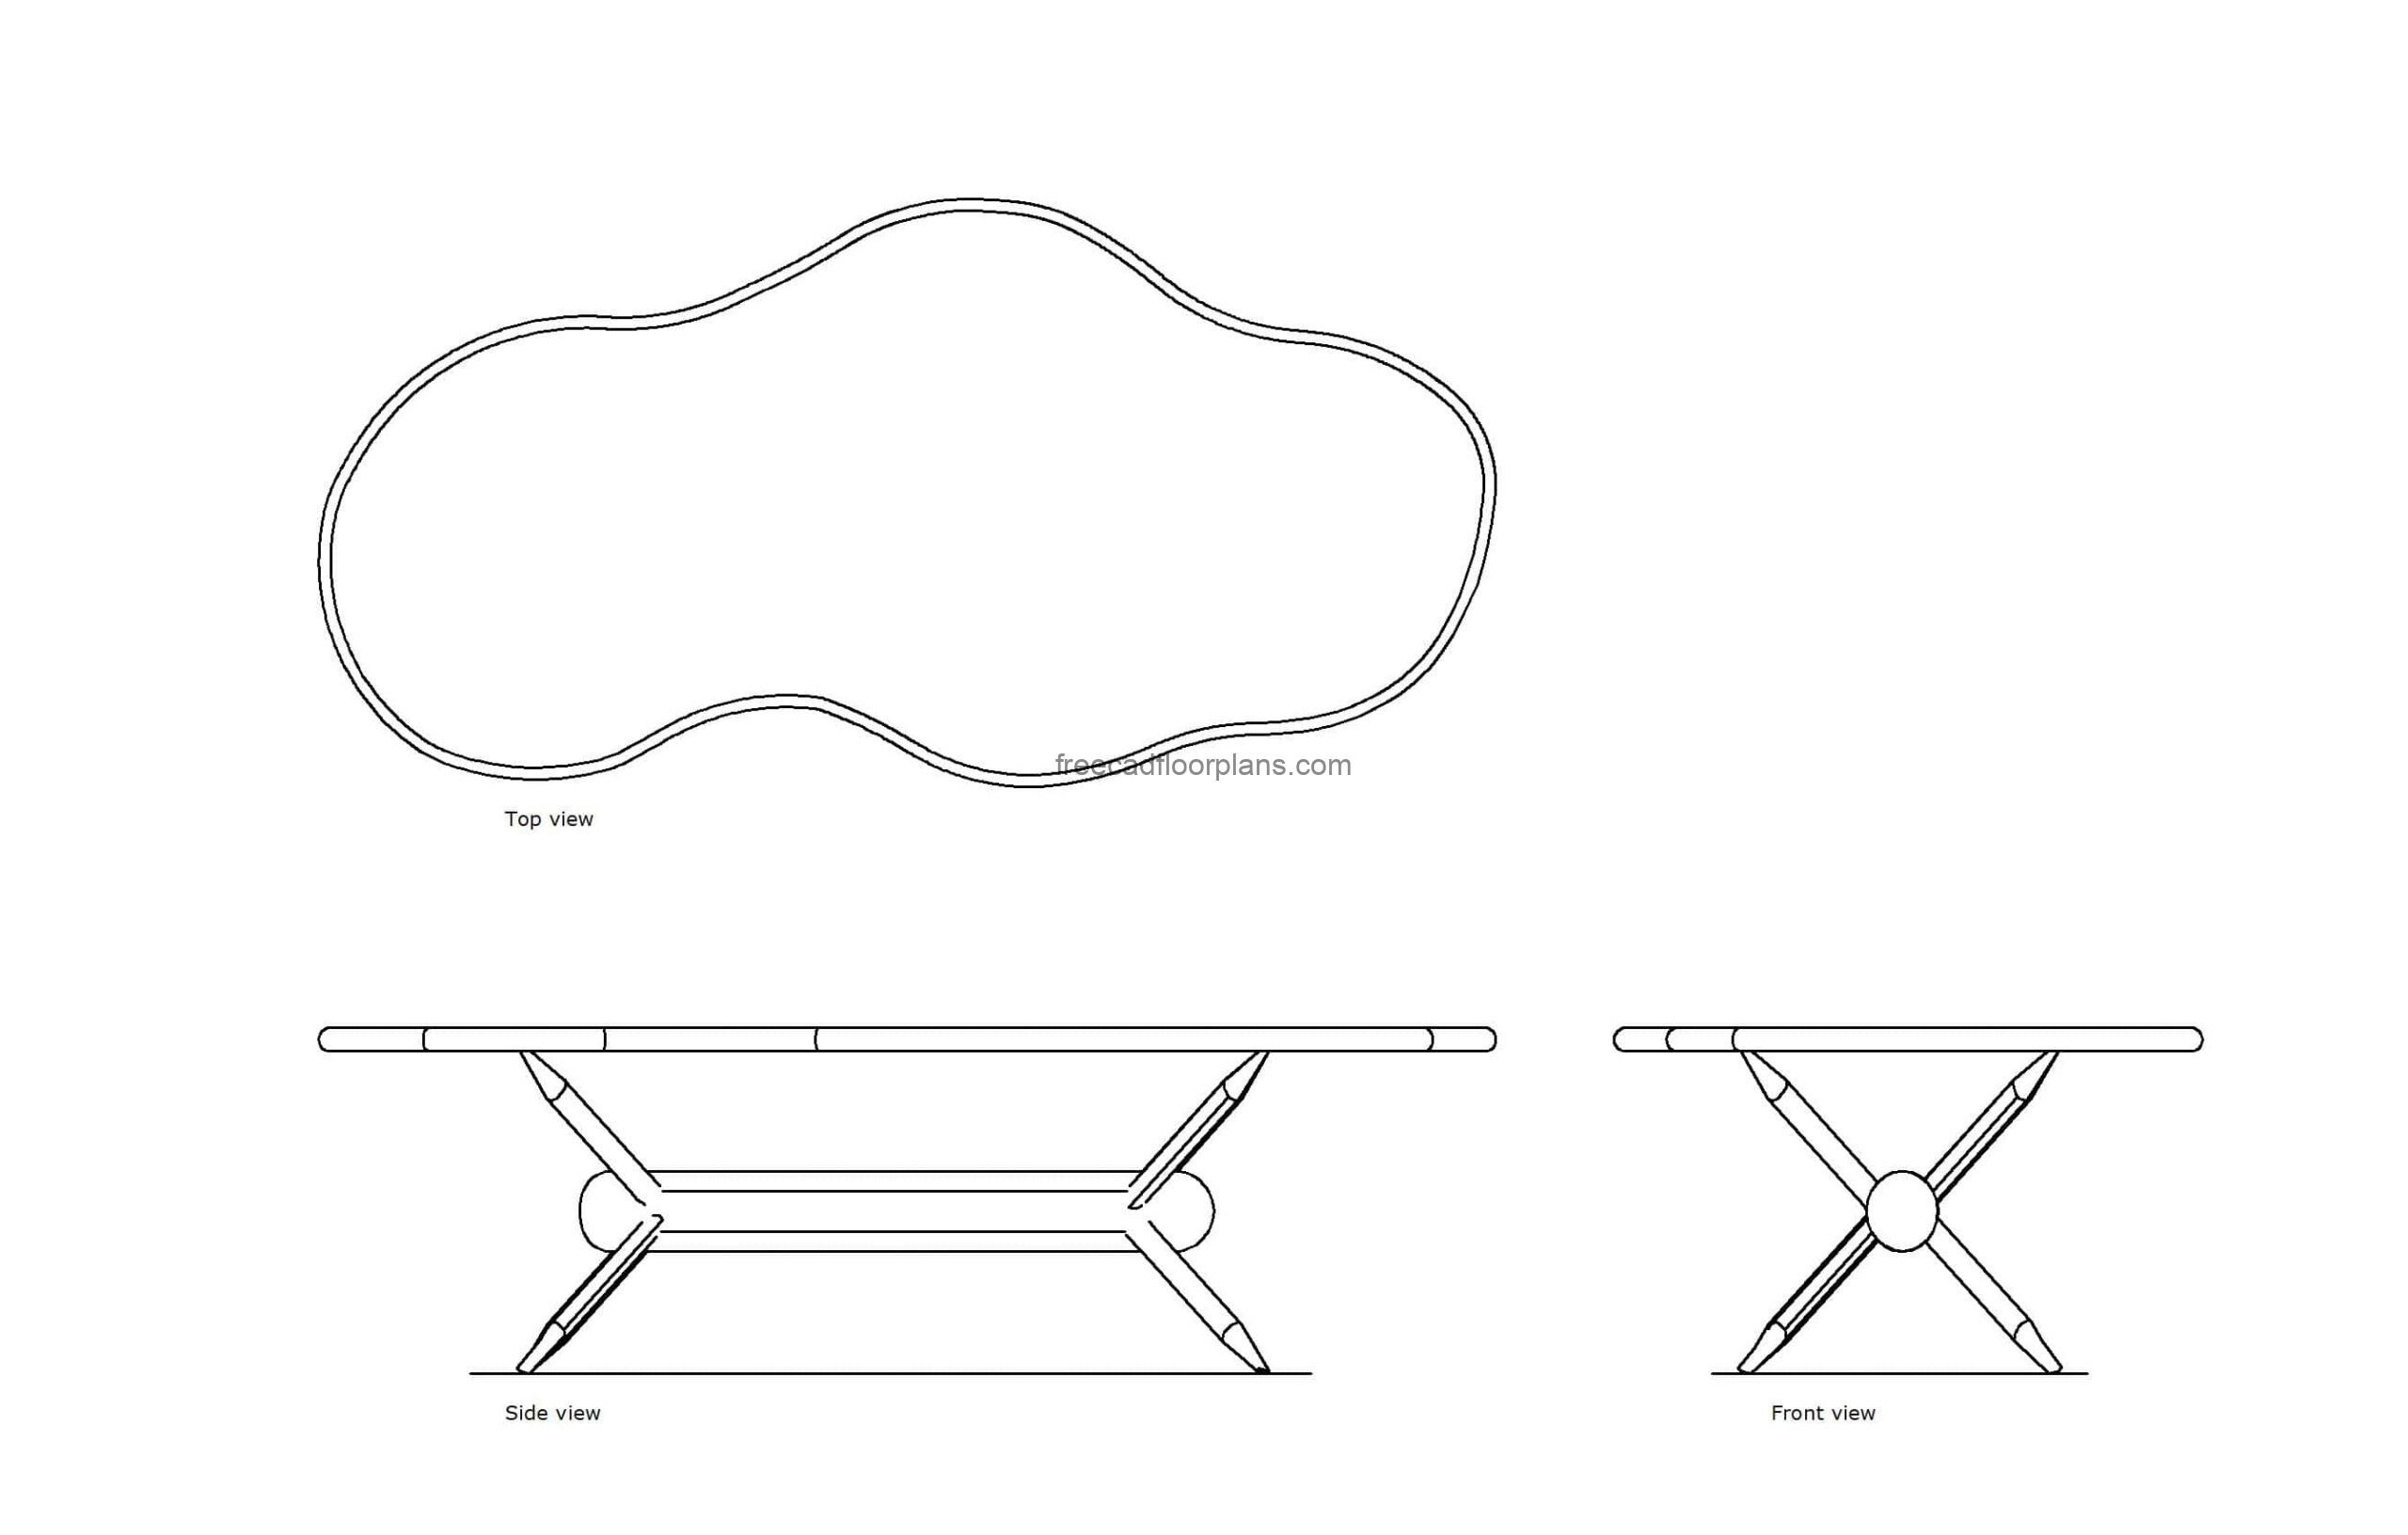 autocad drawing of an organic table, plan and elevation 2d views, dwg file free for download